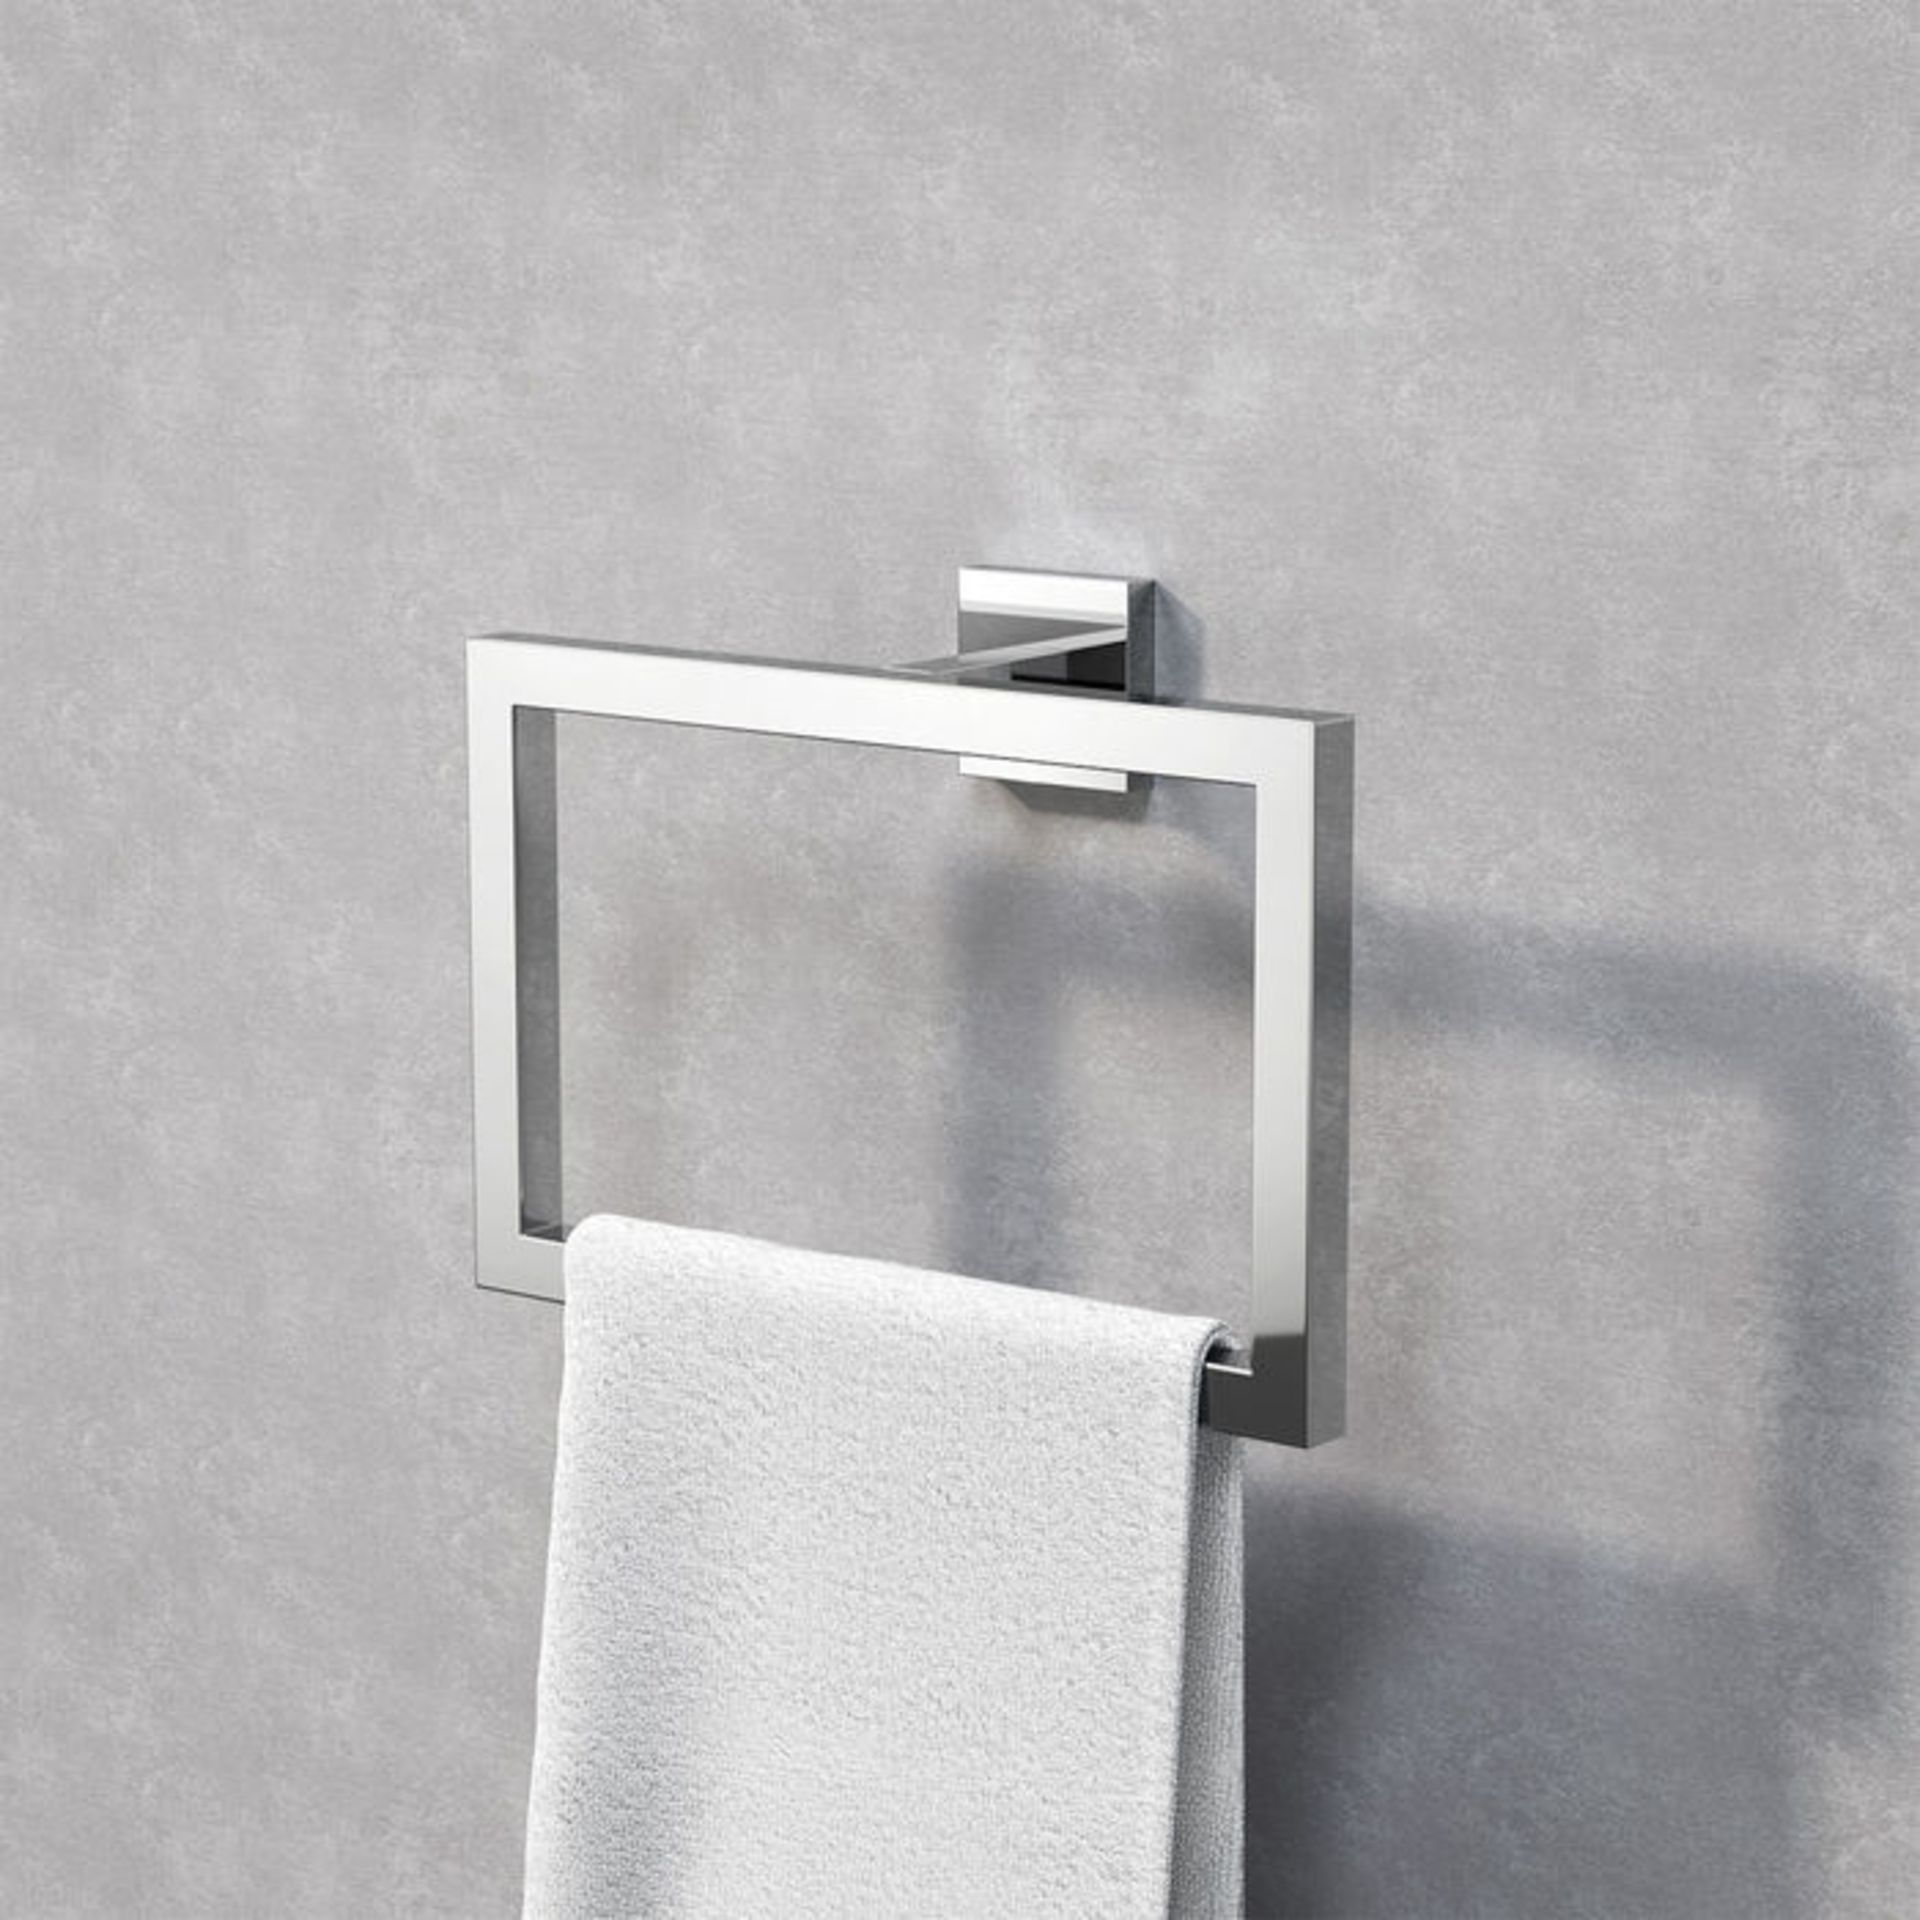 (VZ27) Jesmond Towel Ring Finishes your bathroom with a little extra functionality and style Made - Image 2 of 3